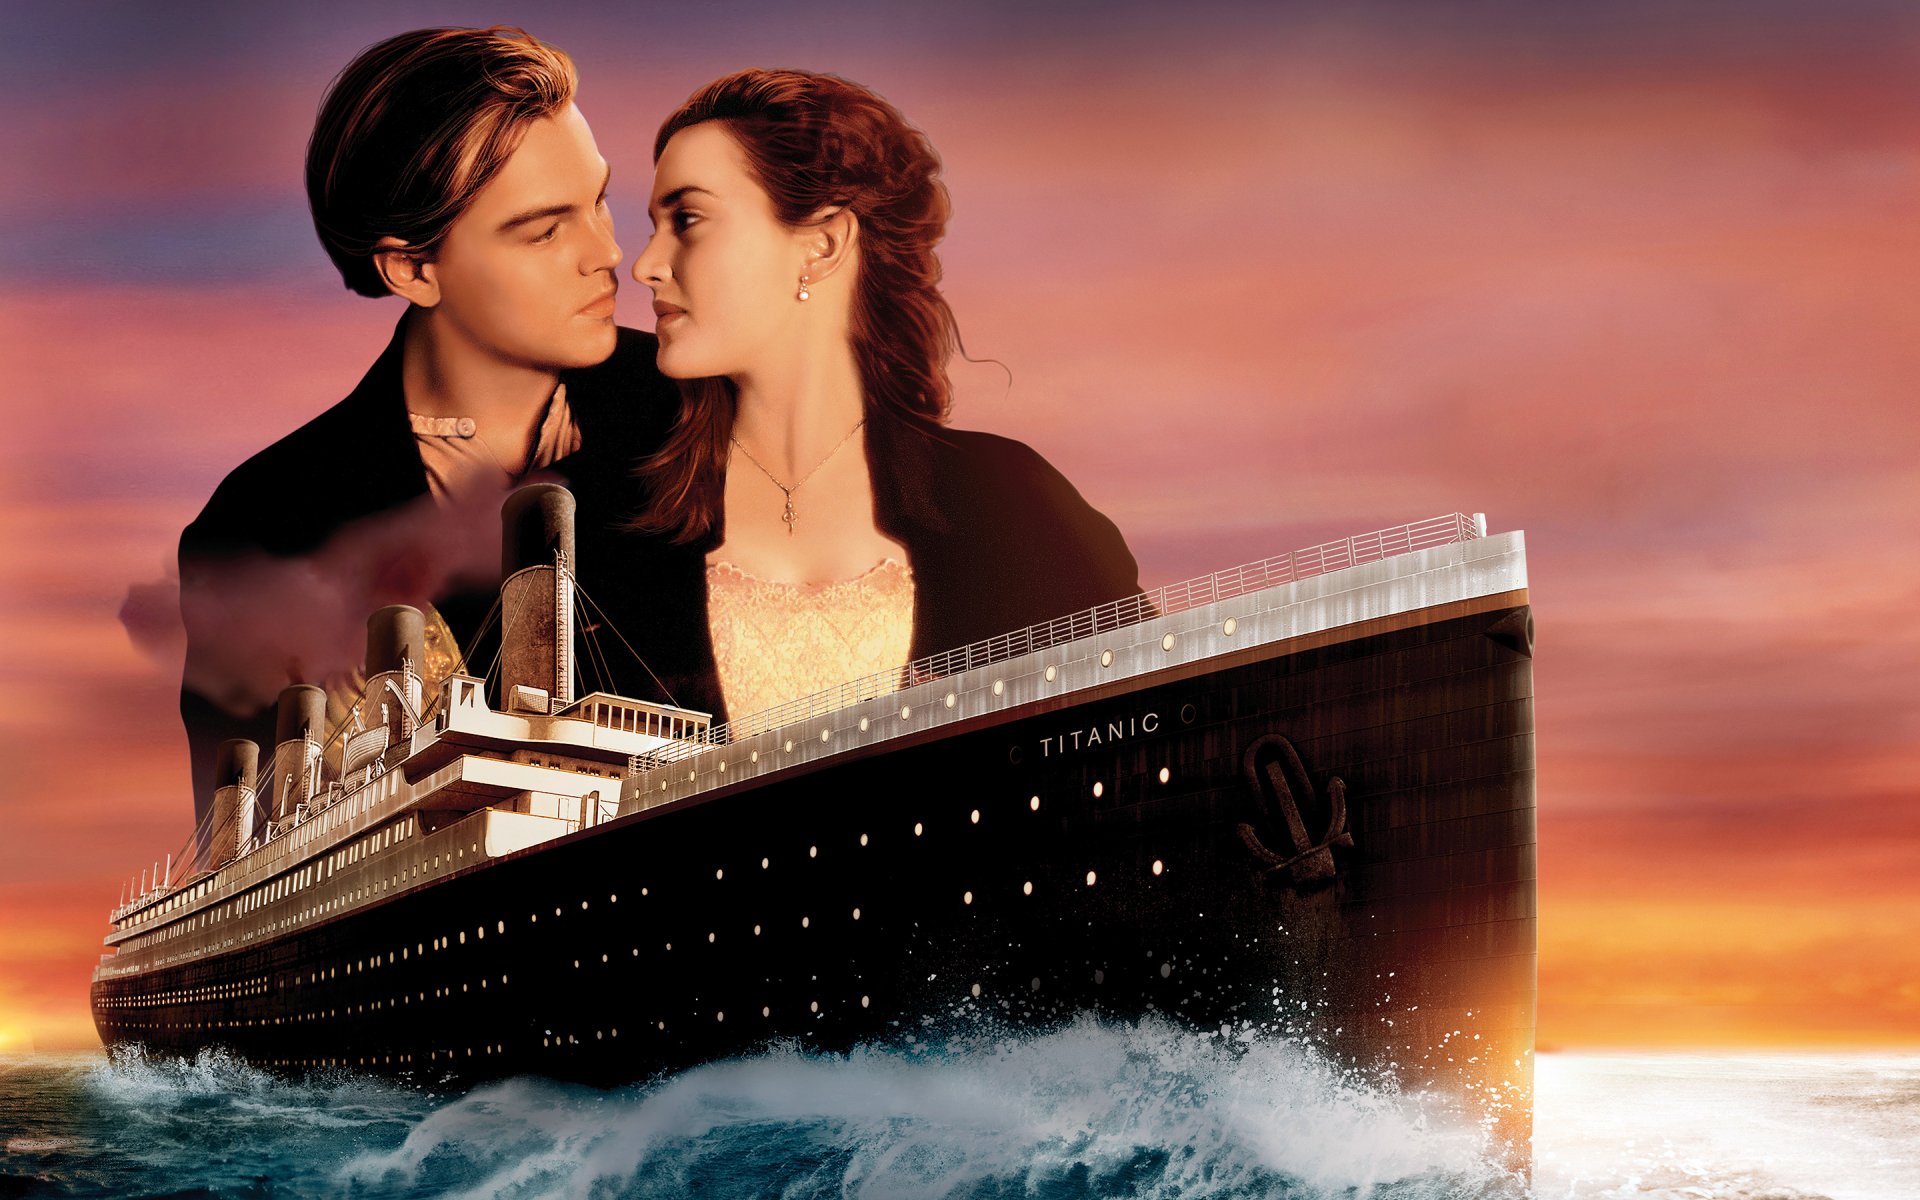 Titanic 4K wallpapers for your desktop or mobile screen free and easy to  download